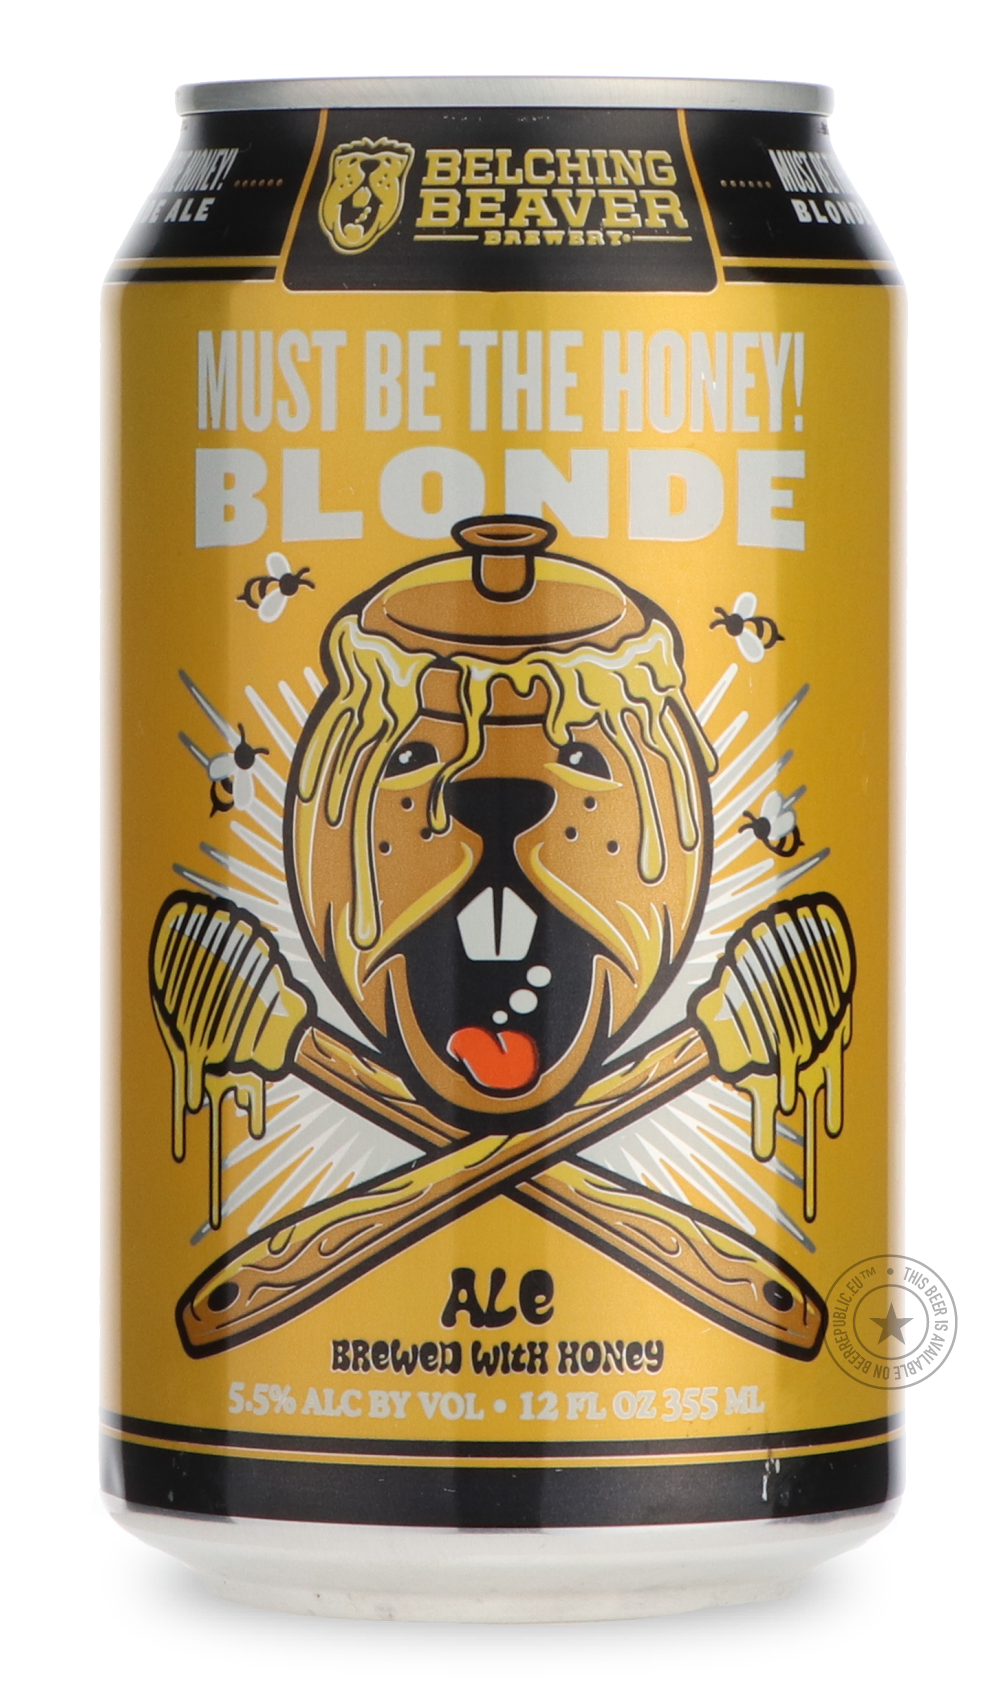 -Belching Beaver- Must Be the Honey!-Pale- Only @ Beer Republic - The best online beer store for American & Canadian craft beer - Buy beer online from the USA and Canada - Bier online kopen - Amerikaans bier kopen - Craft beer store - Craft beer kopen - Amerikanisch bier kaufen - Bier online kaufen - Acheter biere online - IPA - Stout - Porter - New England IPA - Hazy IPA - Imperial Stout - Barrel Aged - Barrel Aged Imperial Stout - Brown - Dark beer - Blond - Blonde - Pilsner - Lager - Wheat - Weizen - Amb